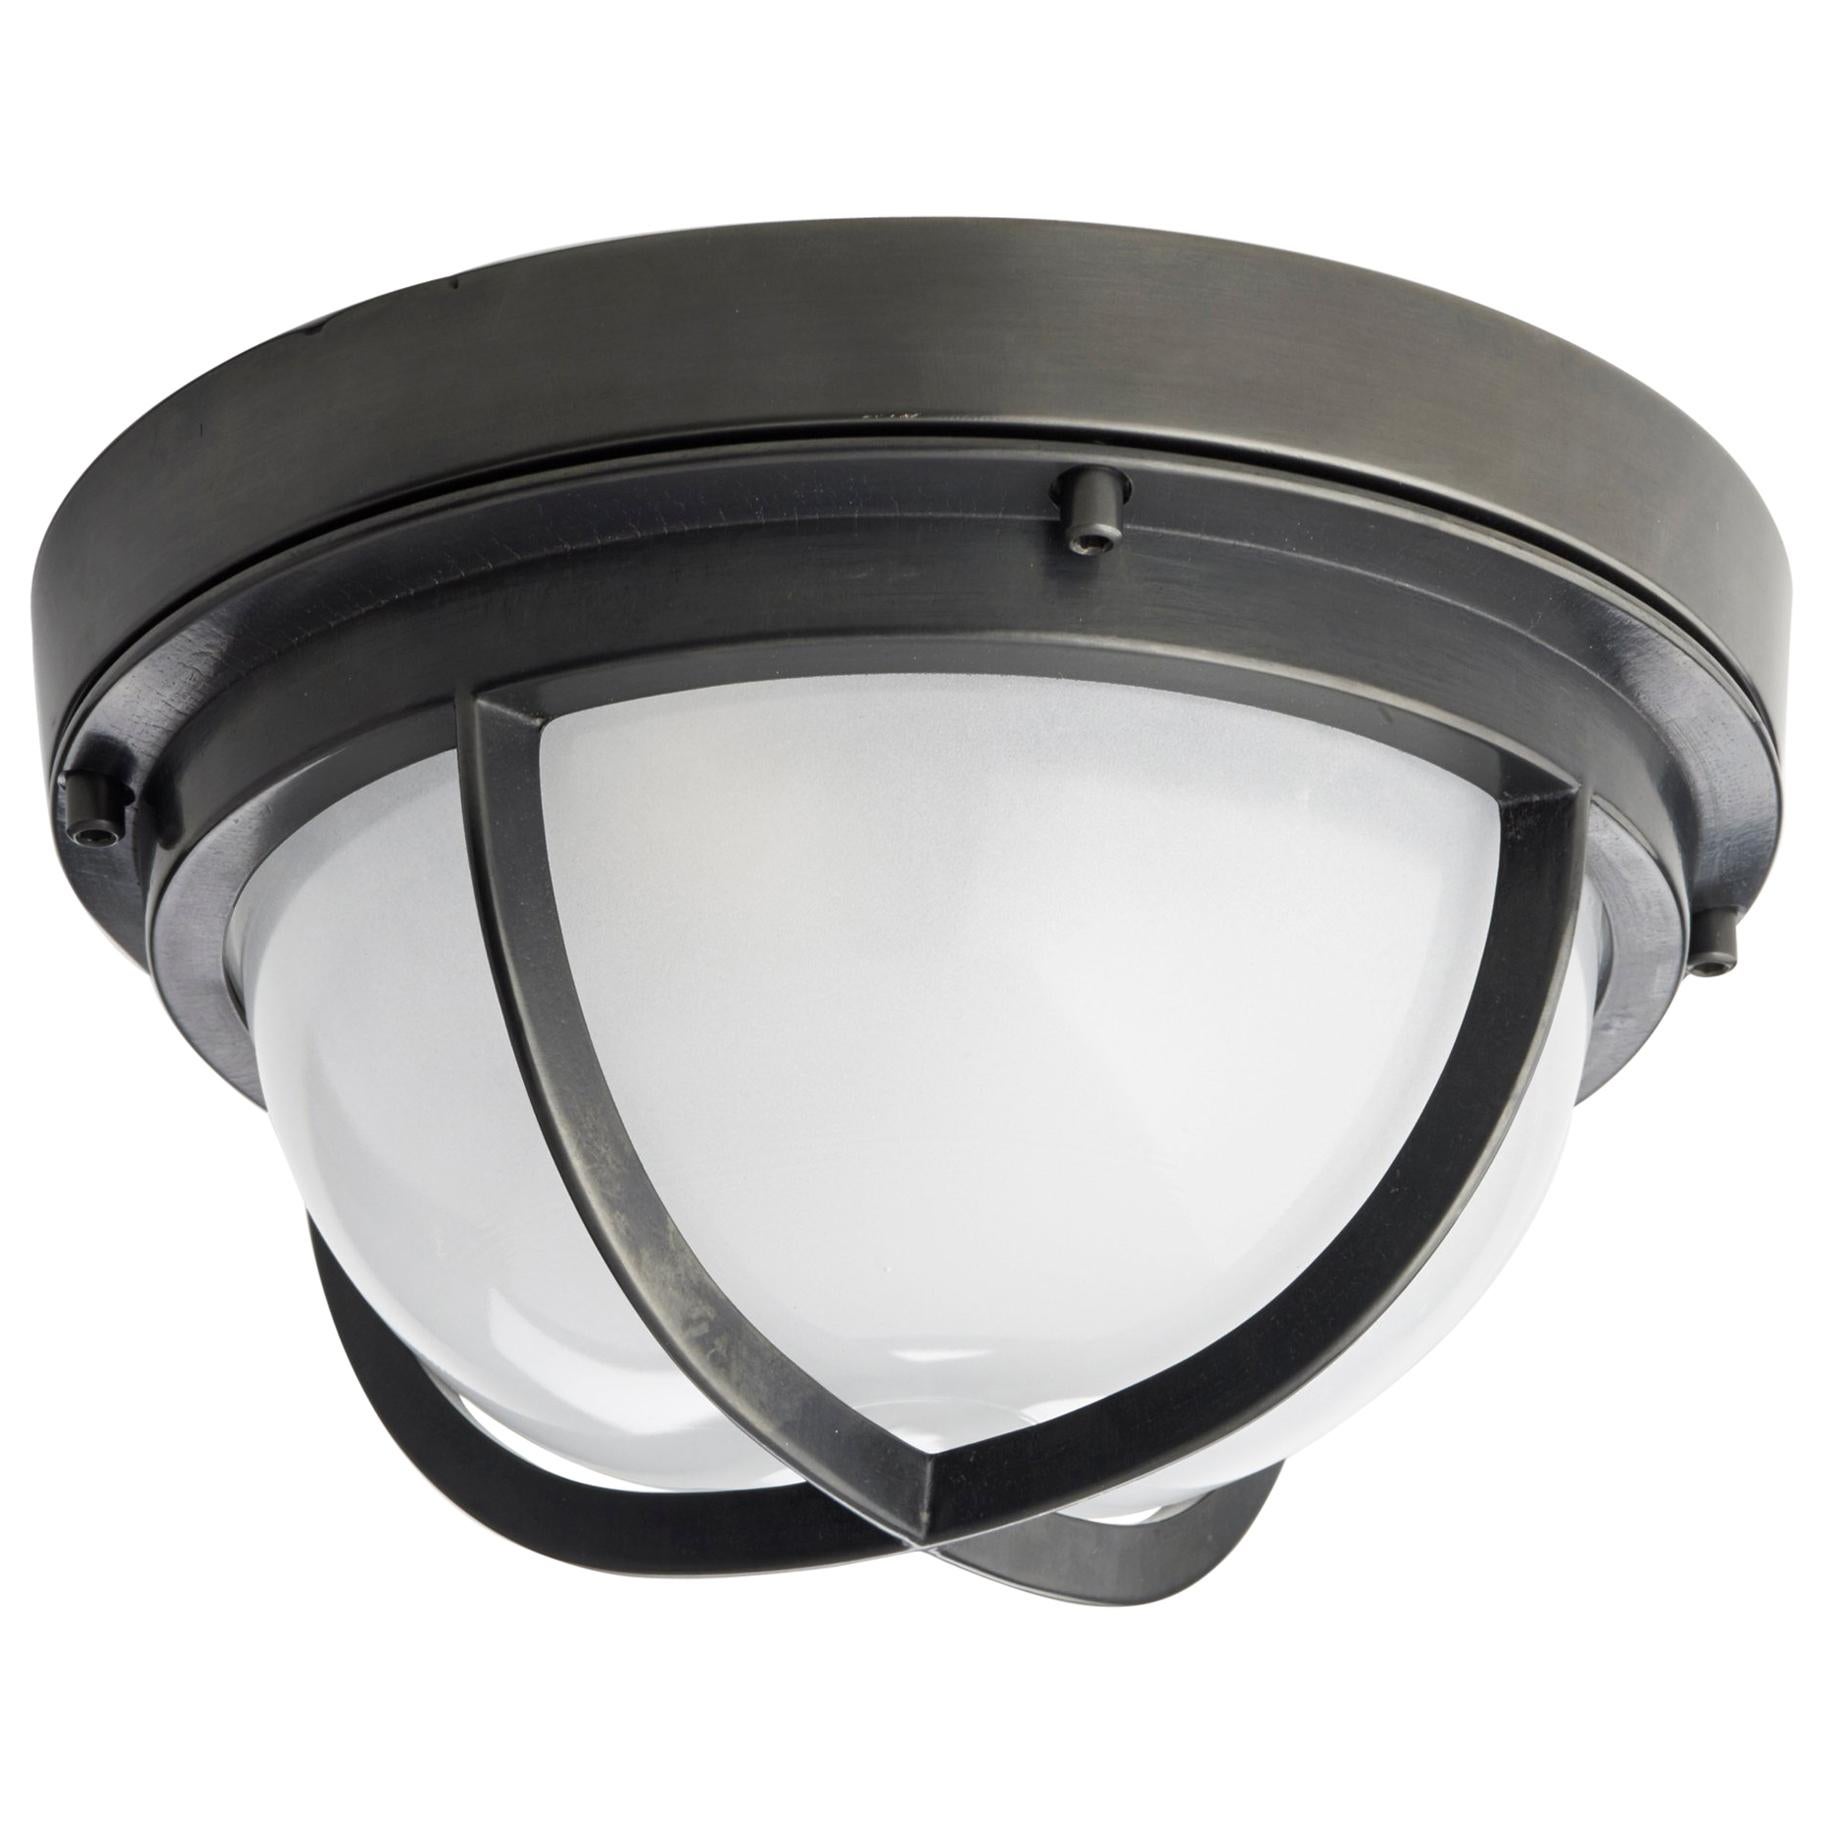 Tekna Cape Cornwall Wall or Ceiling Light with Dark Bronze Finish